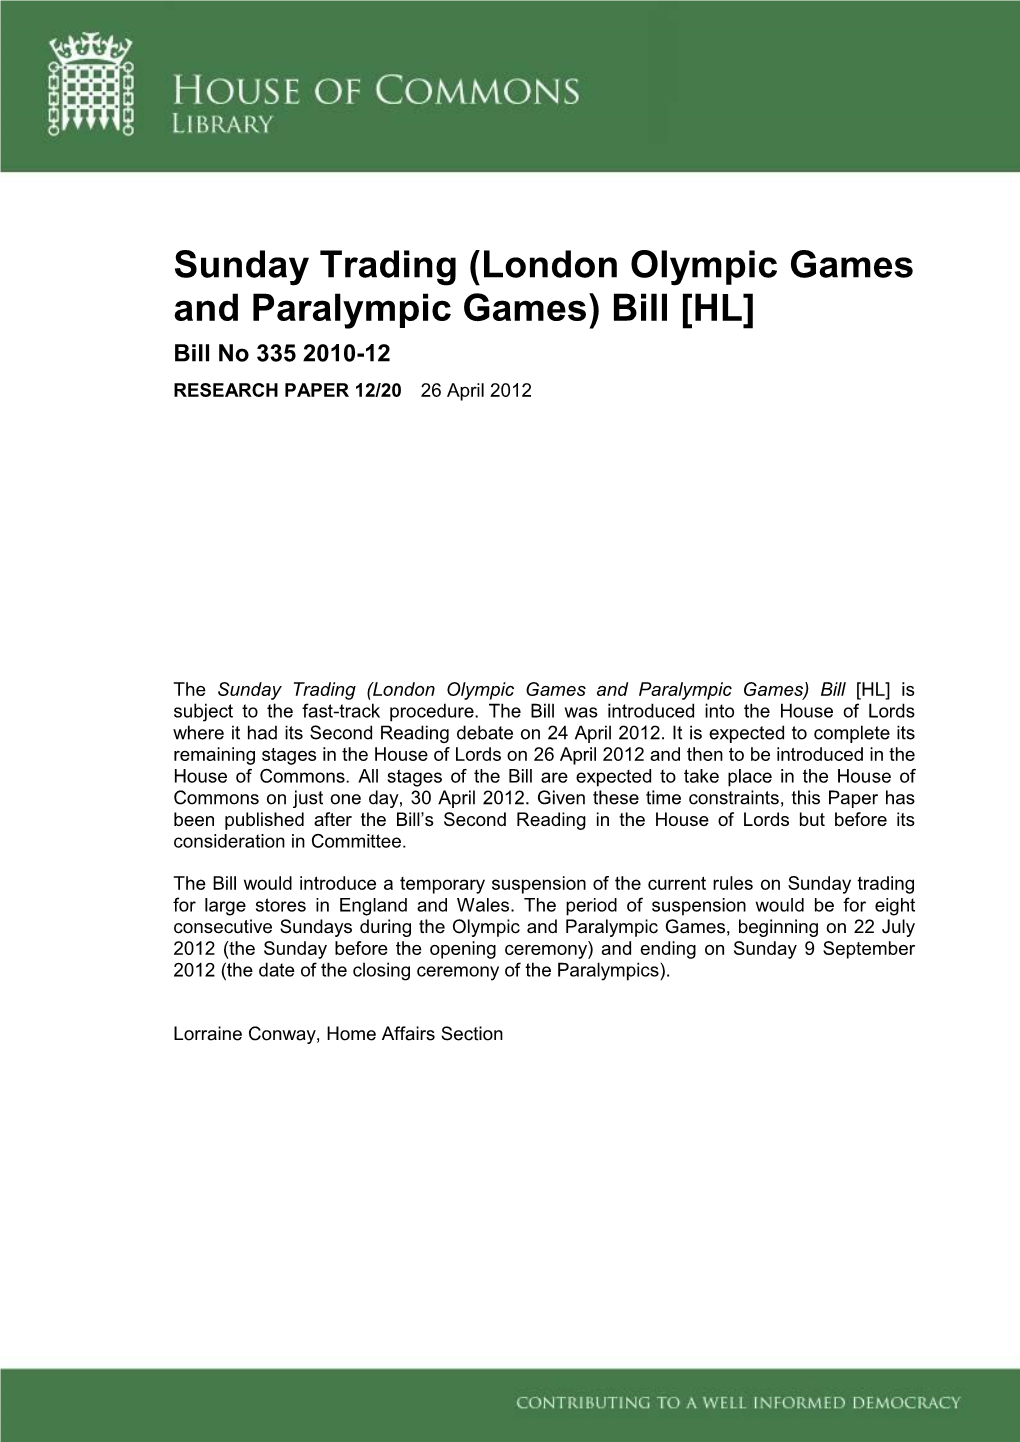 Sunday Trading (London Olympic Games and Paralympic Games) Bill [HL] Bill No 335 2010-12 RESEARCH PAPER 12/20 26 April 2012